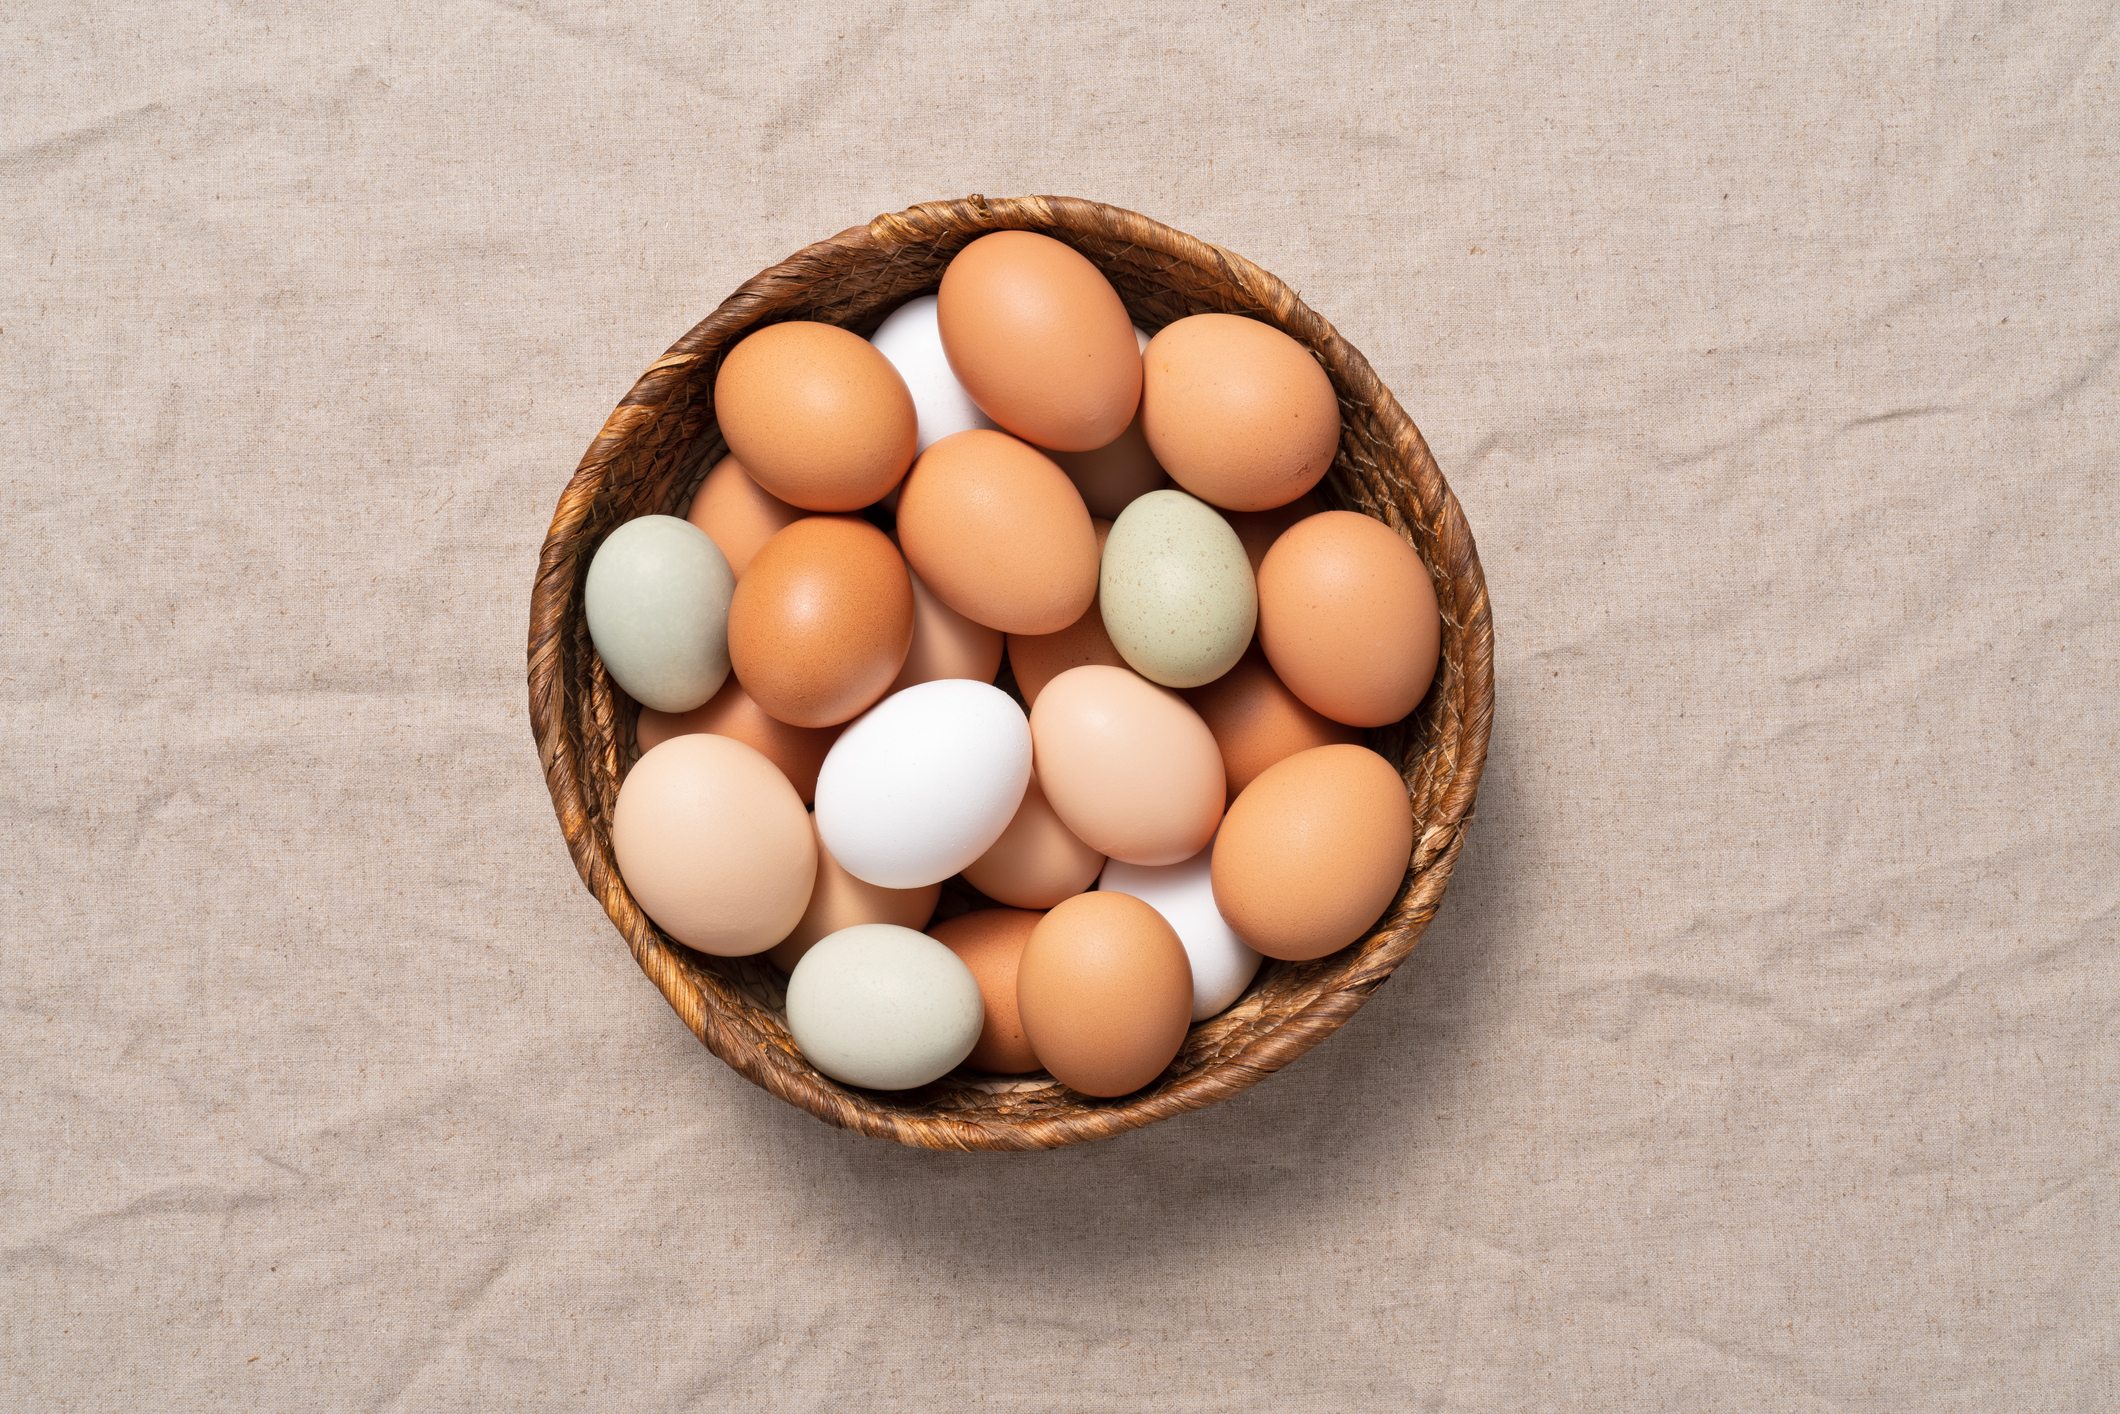 Multicolored chicken eggs in a basket on a beige colored linen tablecloth.